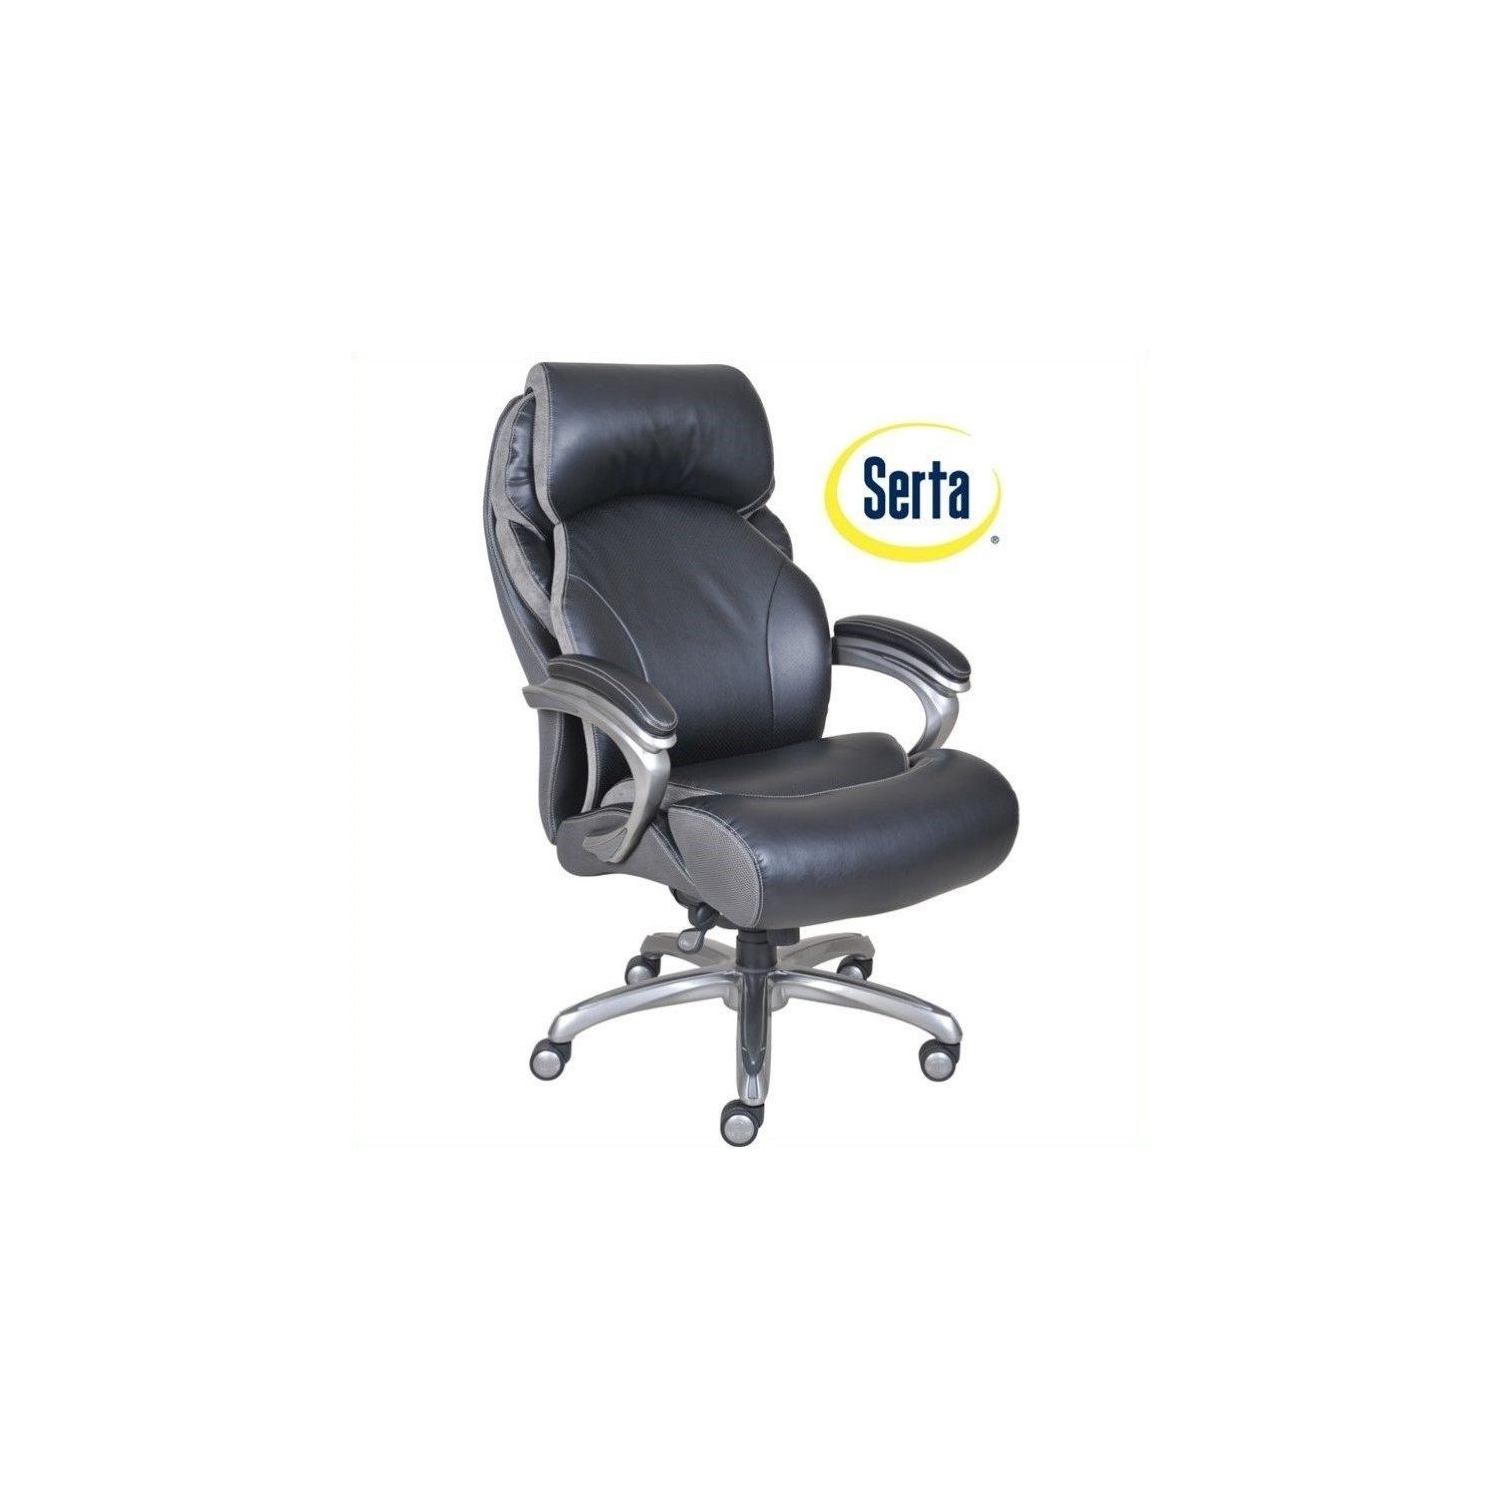 Serta Jackson Big and Tall Executive Office Chair with Smart Layers Black